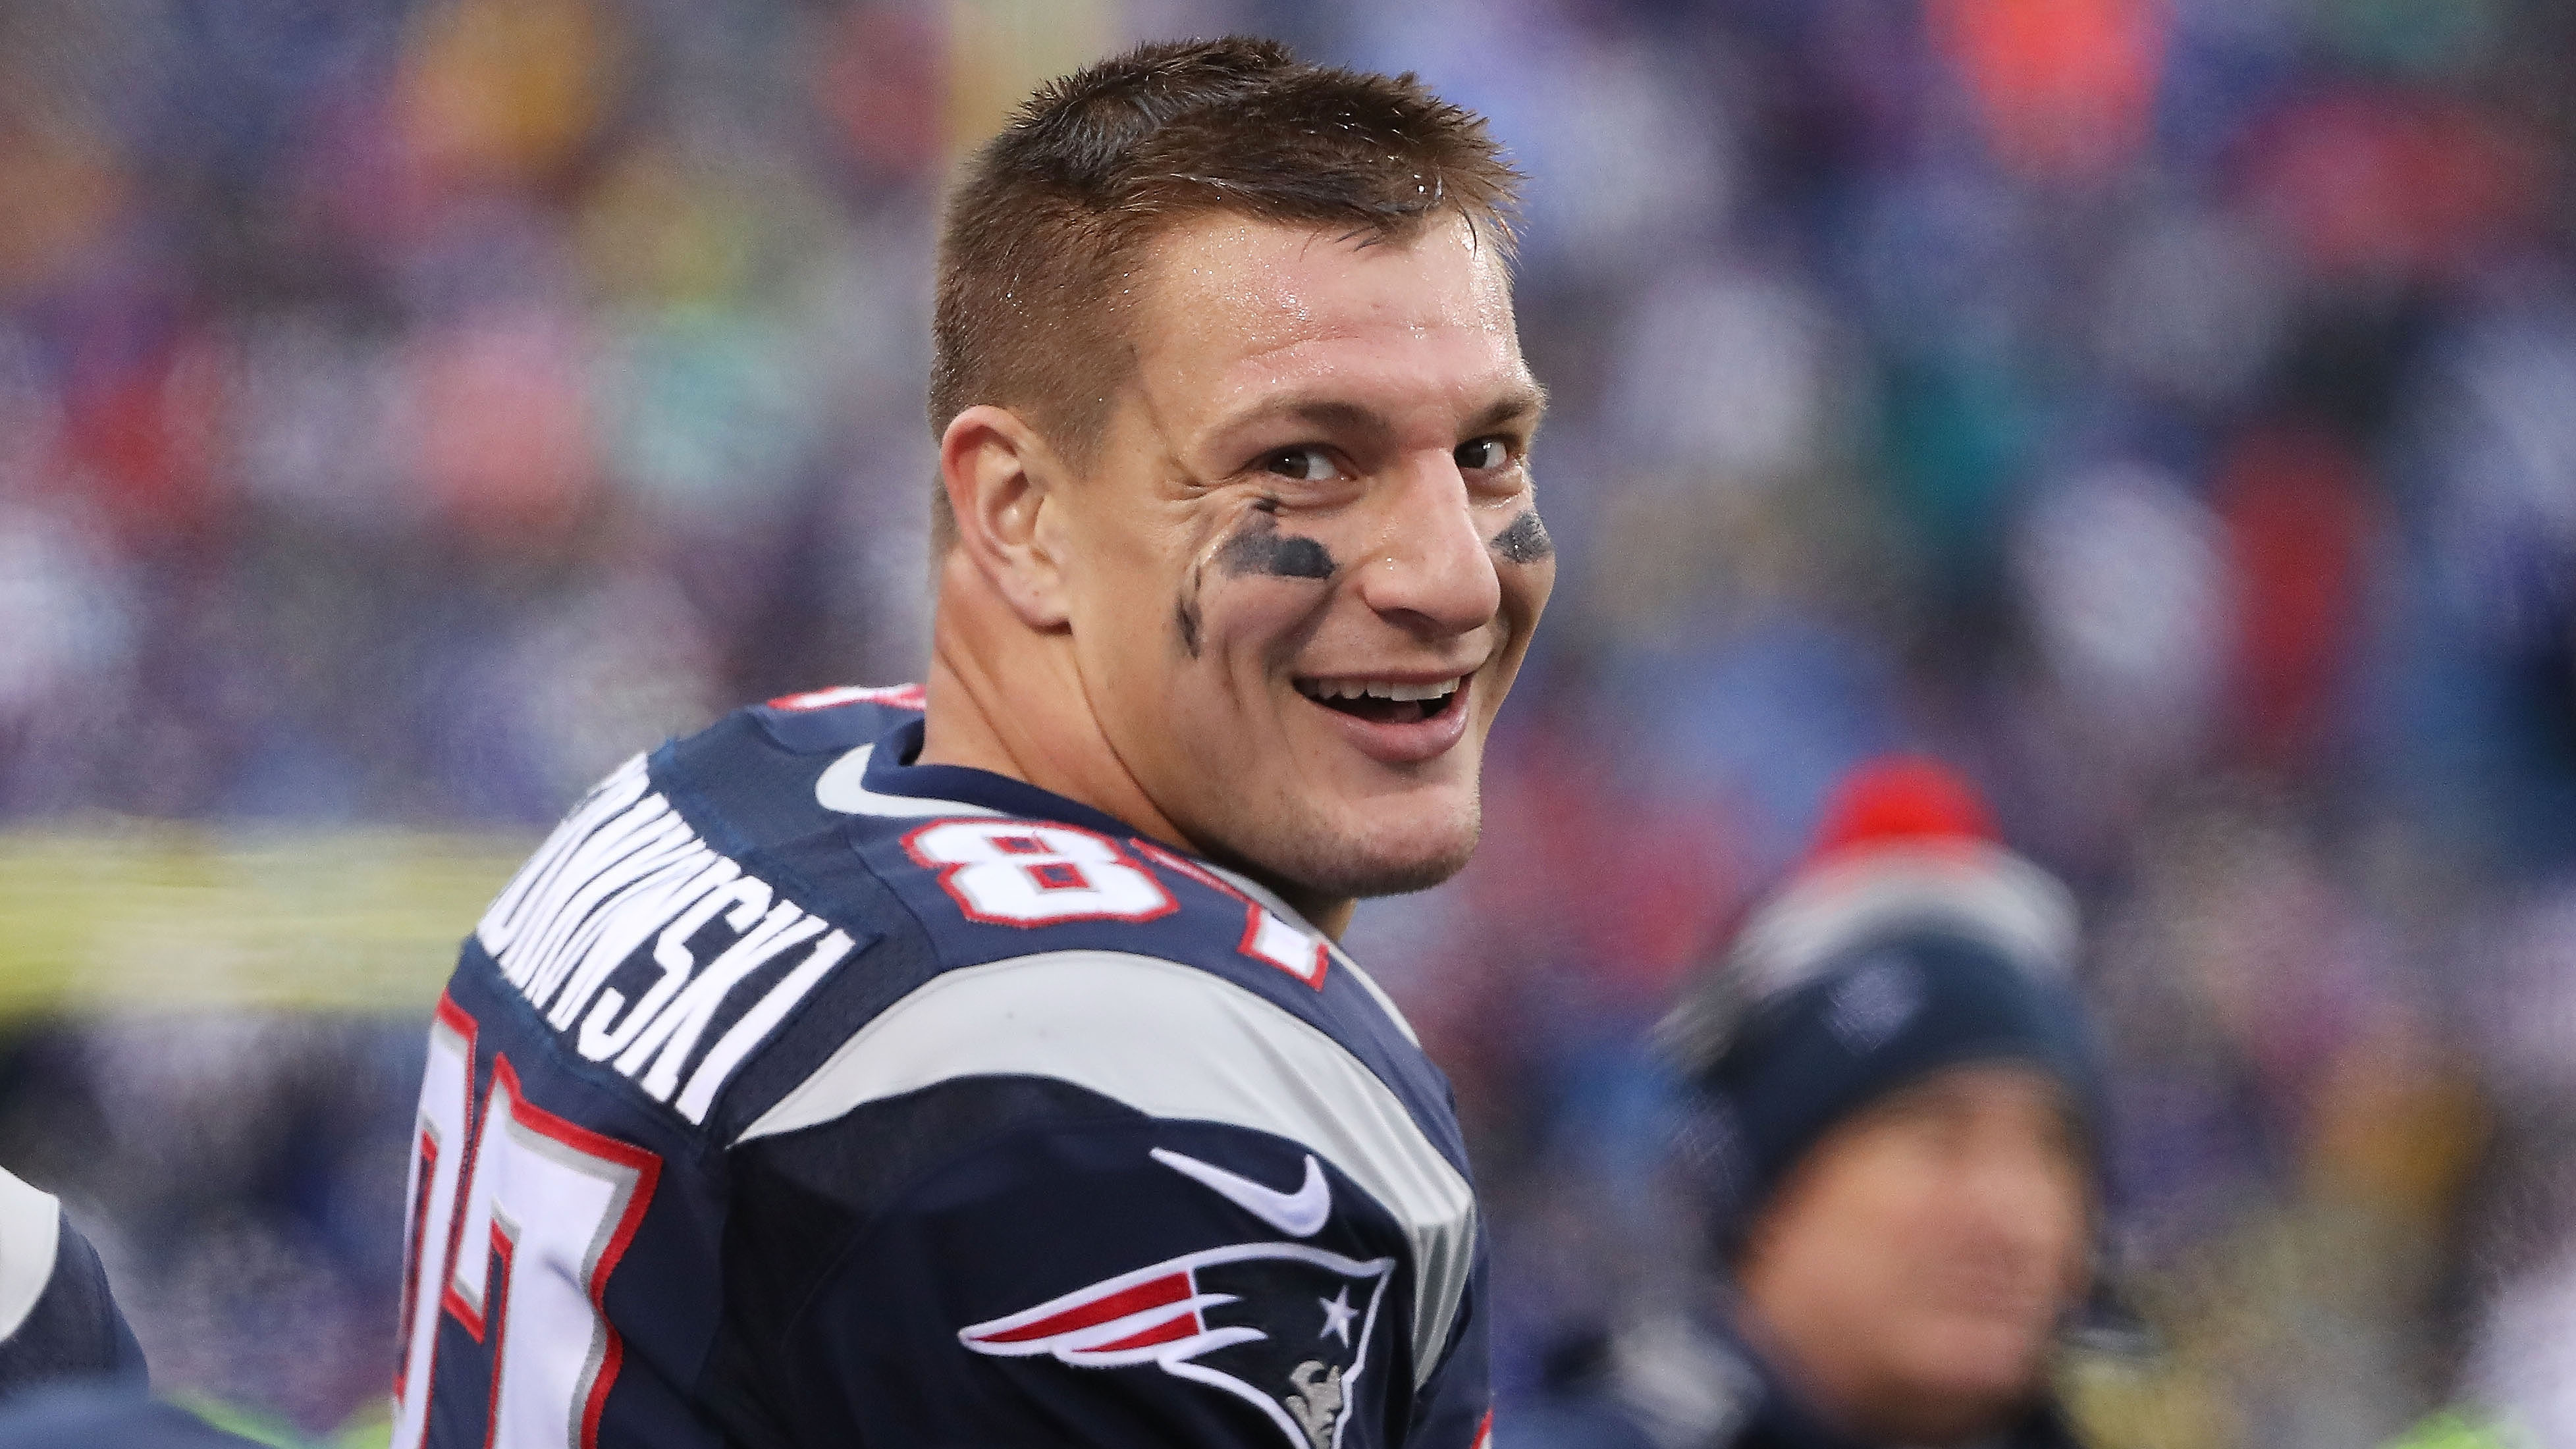 Rob Gronkowski Ranks 15th On NFL’s Top 100 List, Making It A Pretty Silly List ...3912 x 2201